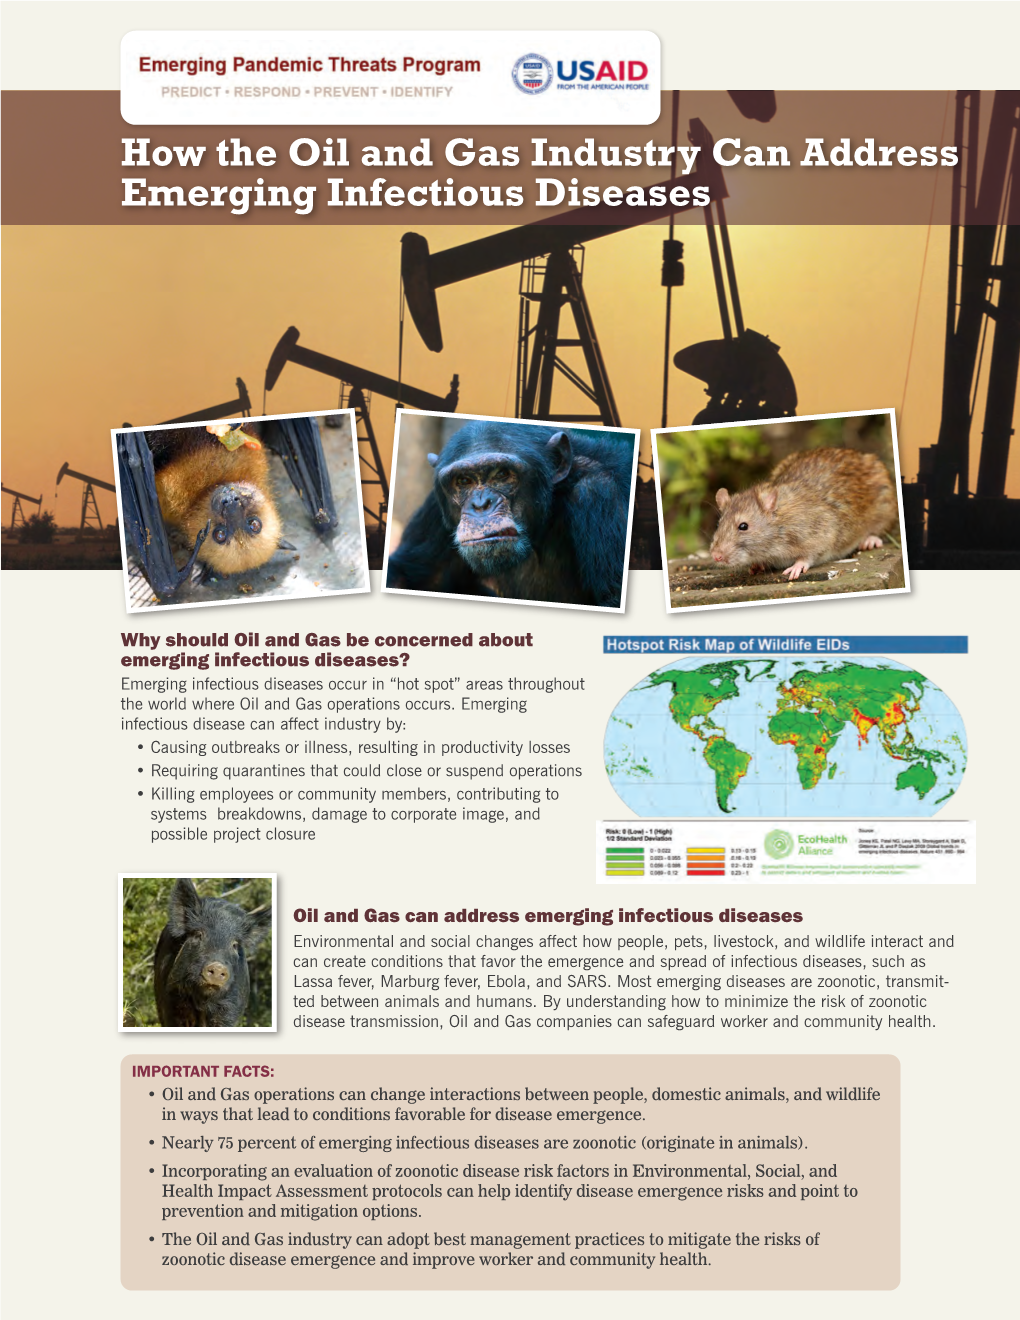 How the Oil and Gas Industry Can Address Emerging Infectious Diseases 3